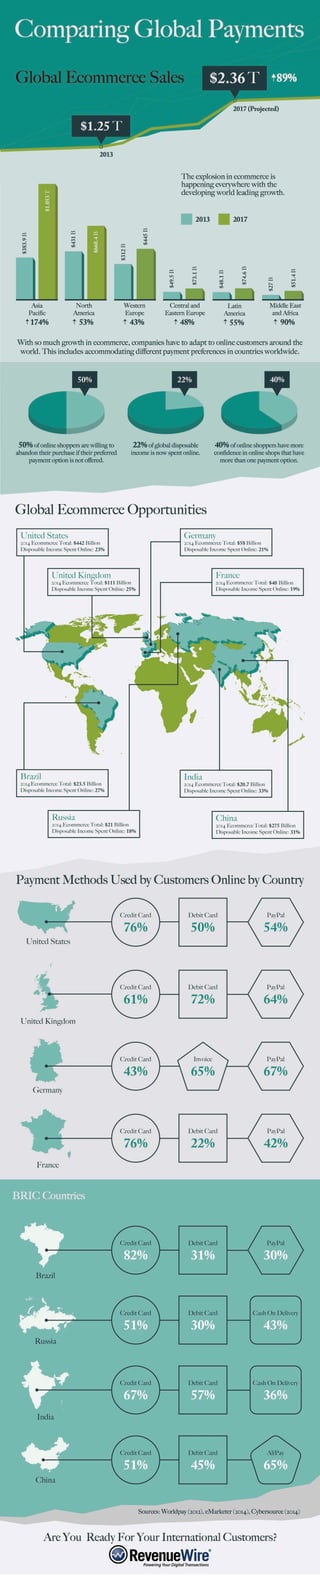 Comparing Global Payments